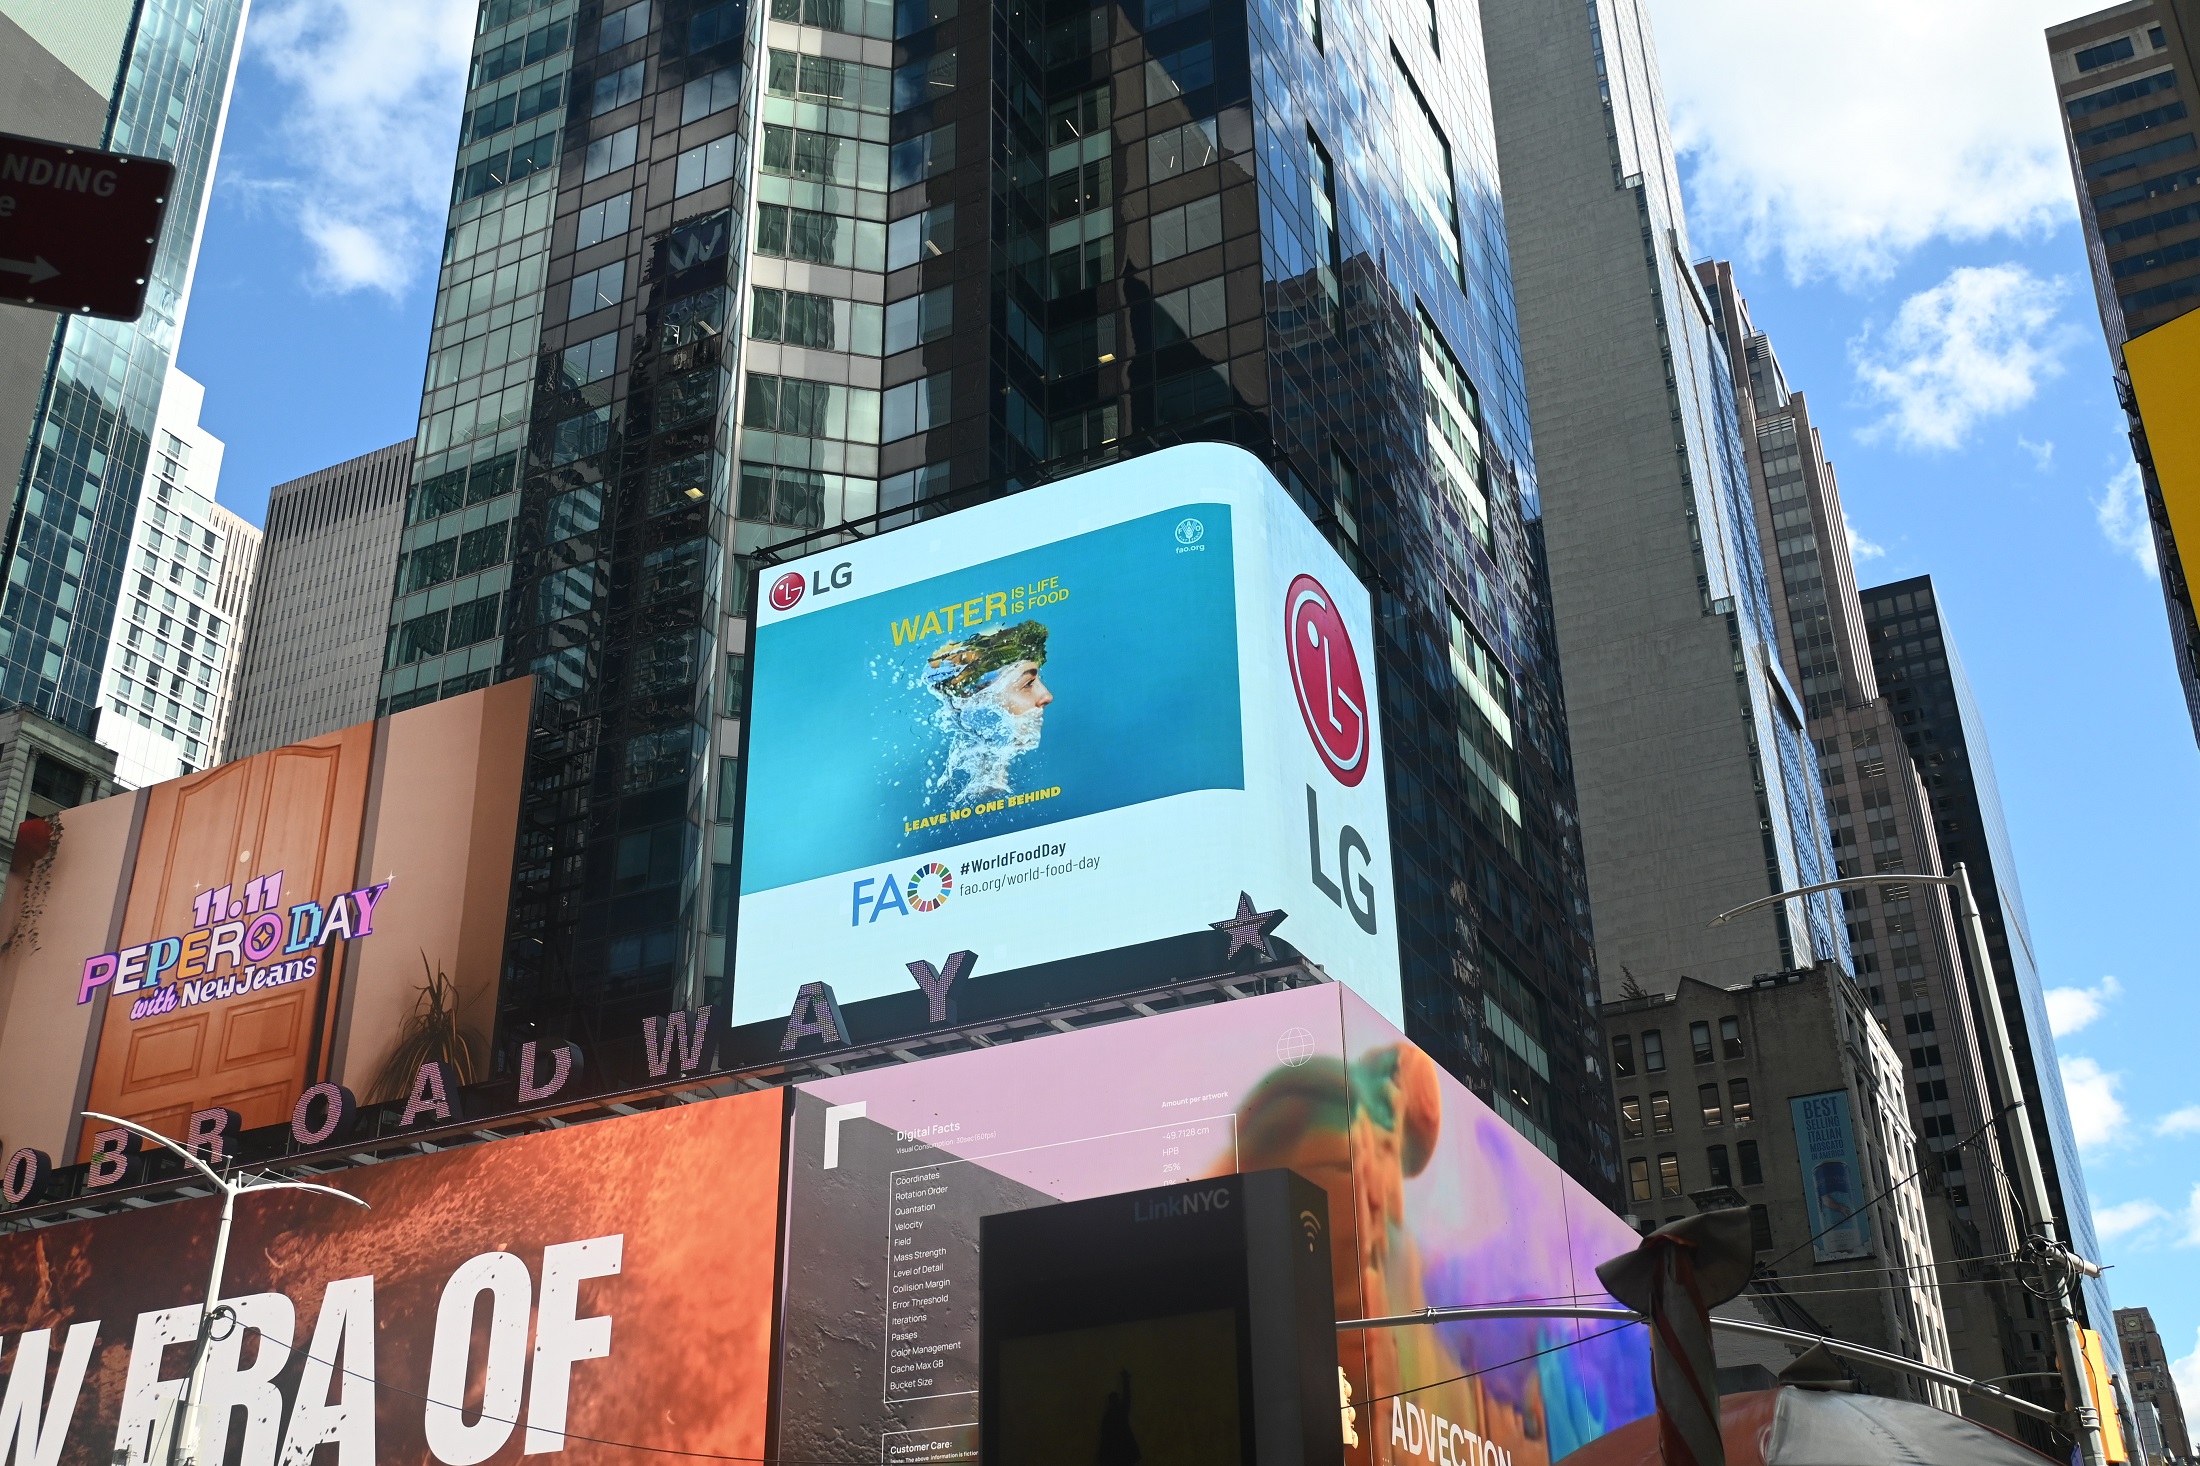 World Food Day video displayed on LG Hope Screen at New York's Time Square